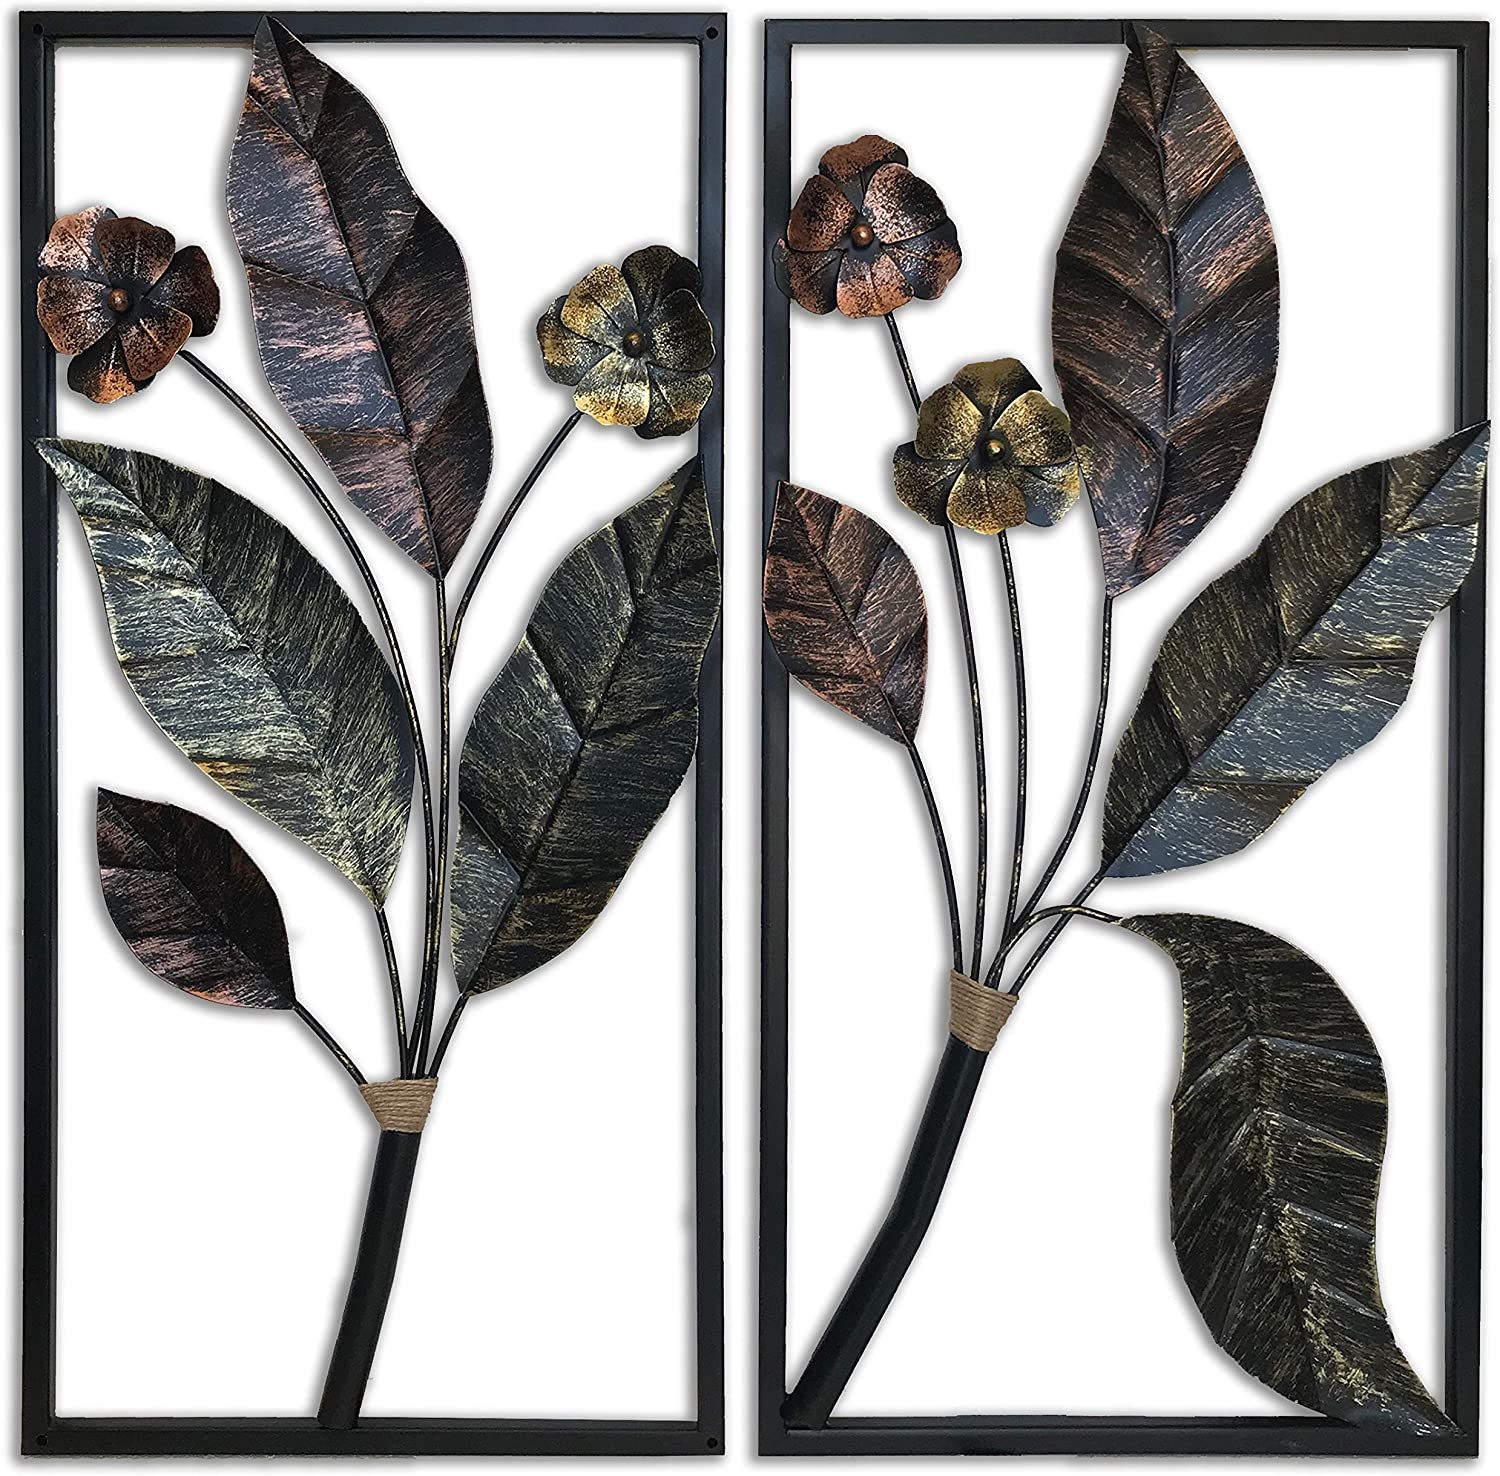 Decorshore Contemporary Metal Wall Art | Wall Decorations | Modern Throughout Polished Metal Wall Art (View 10 of 15)